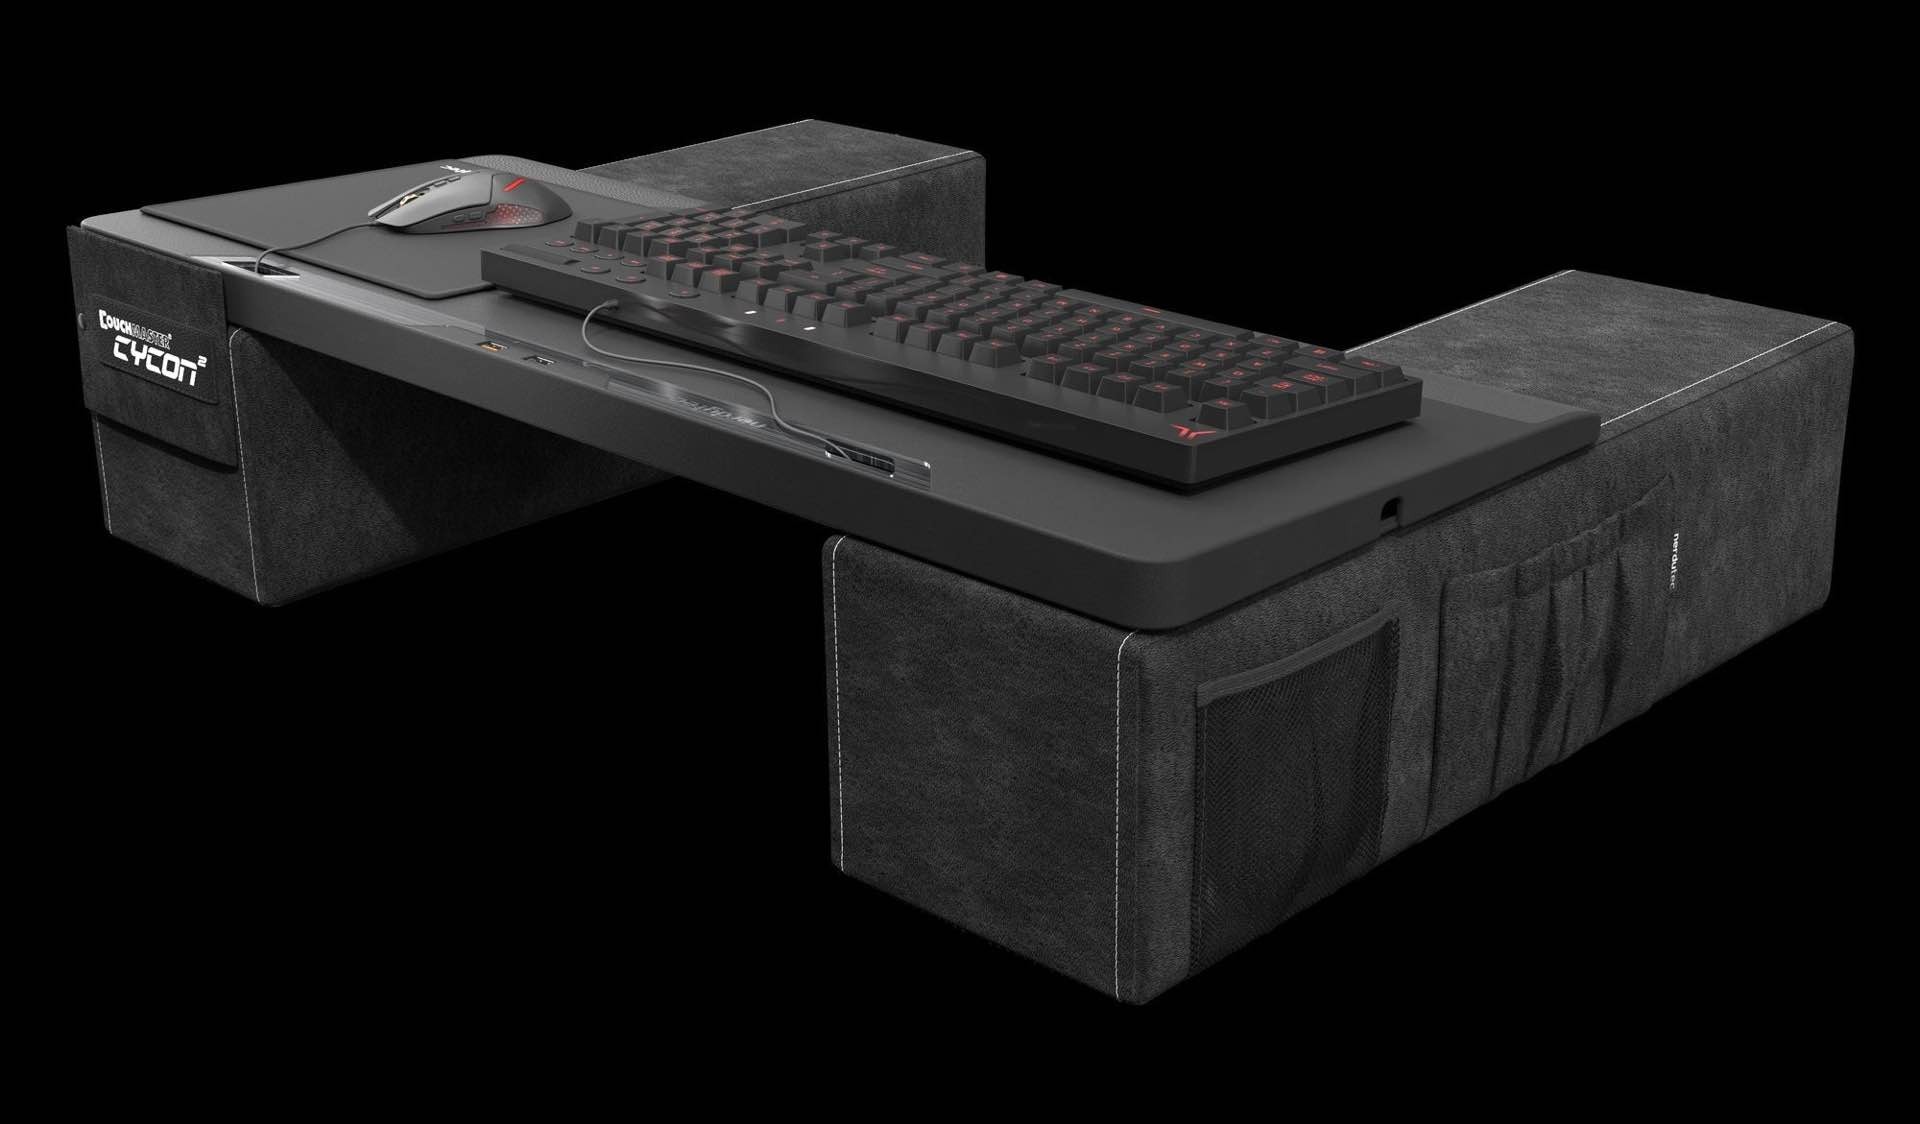 couchmaster-cycon-2-couch-gaming-lap-desk-2